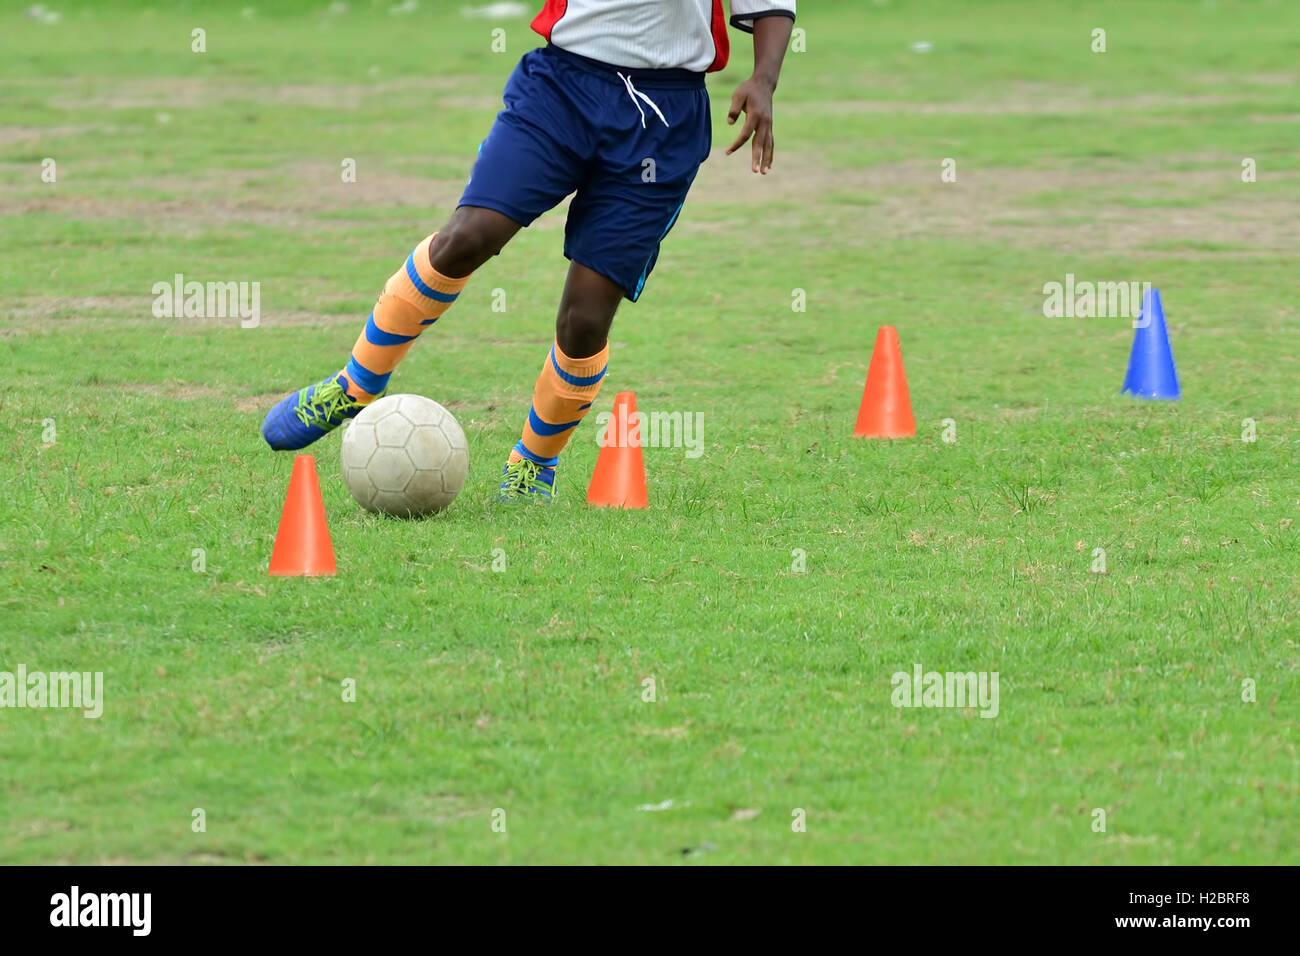 Soccer players practicing dribbling Stock Photo - Alamy